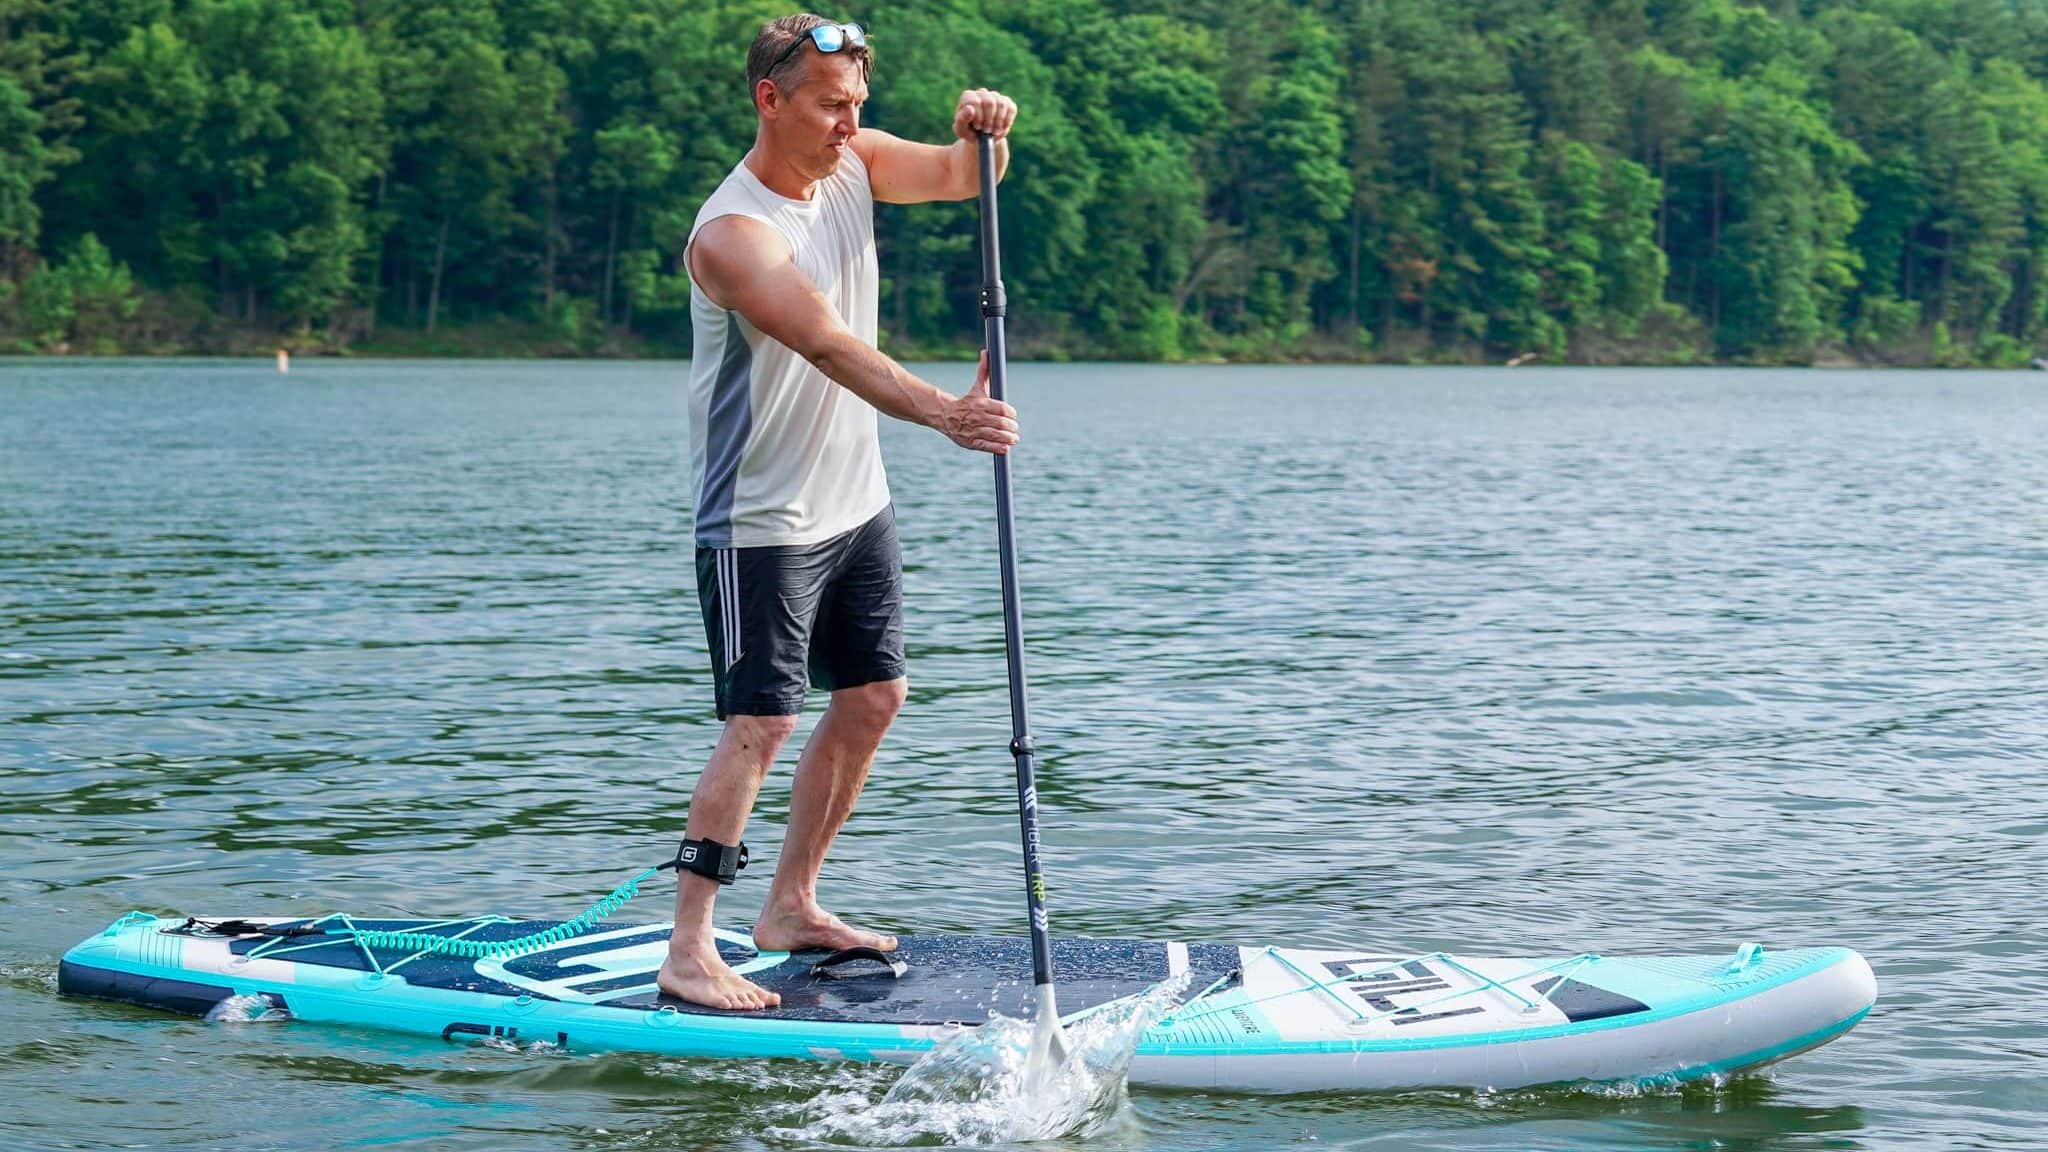 A Gili Adventure paddle board being tested for review.